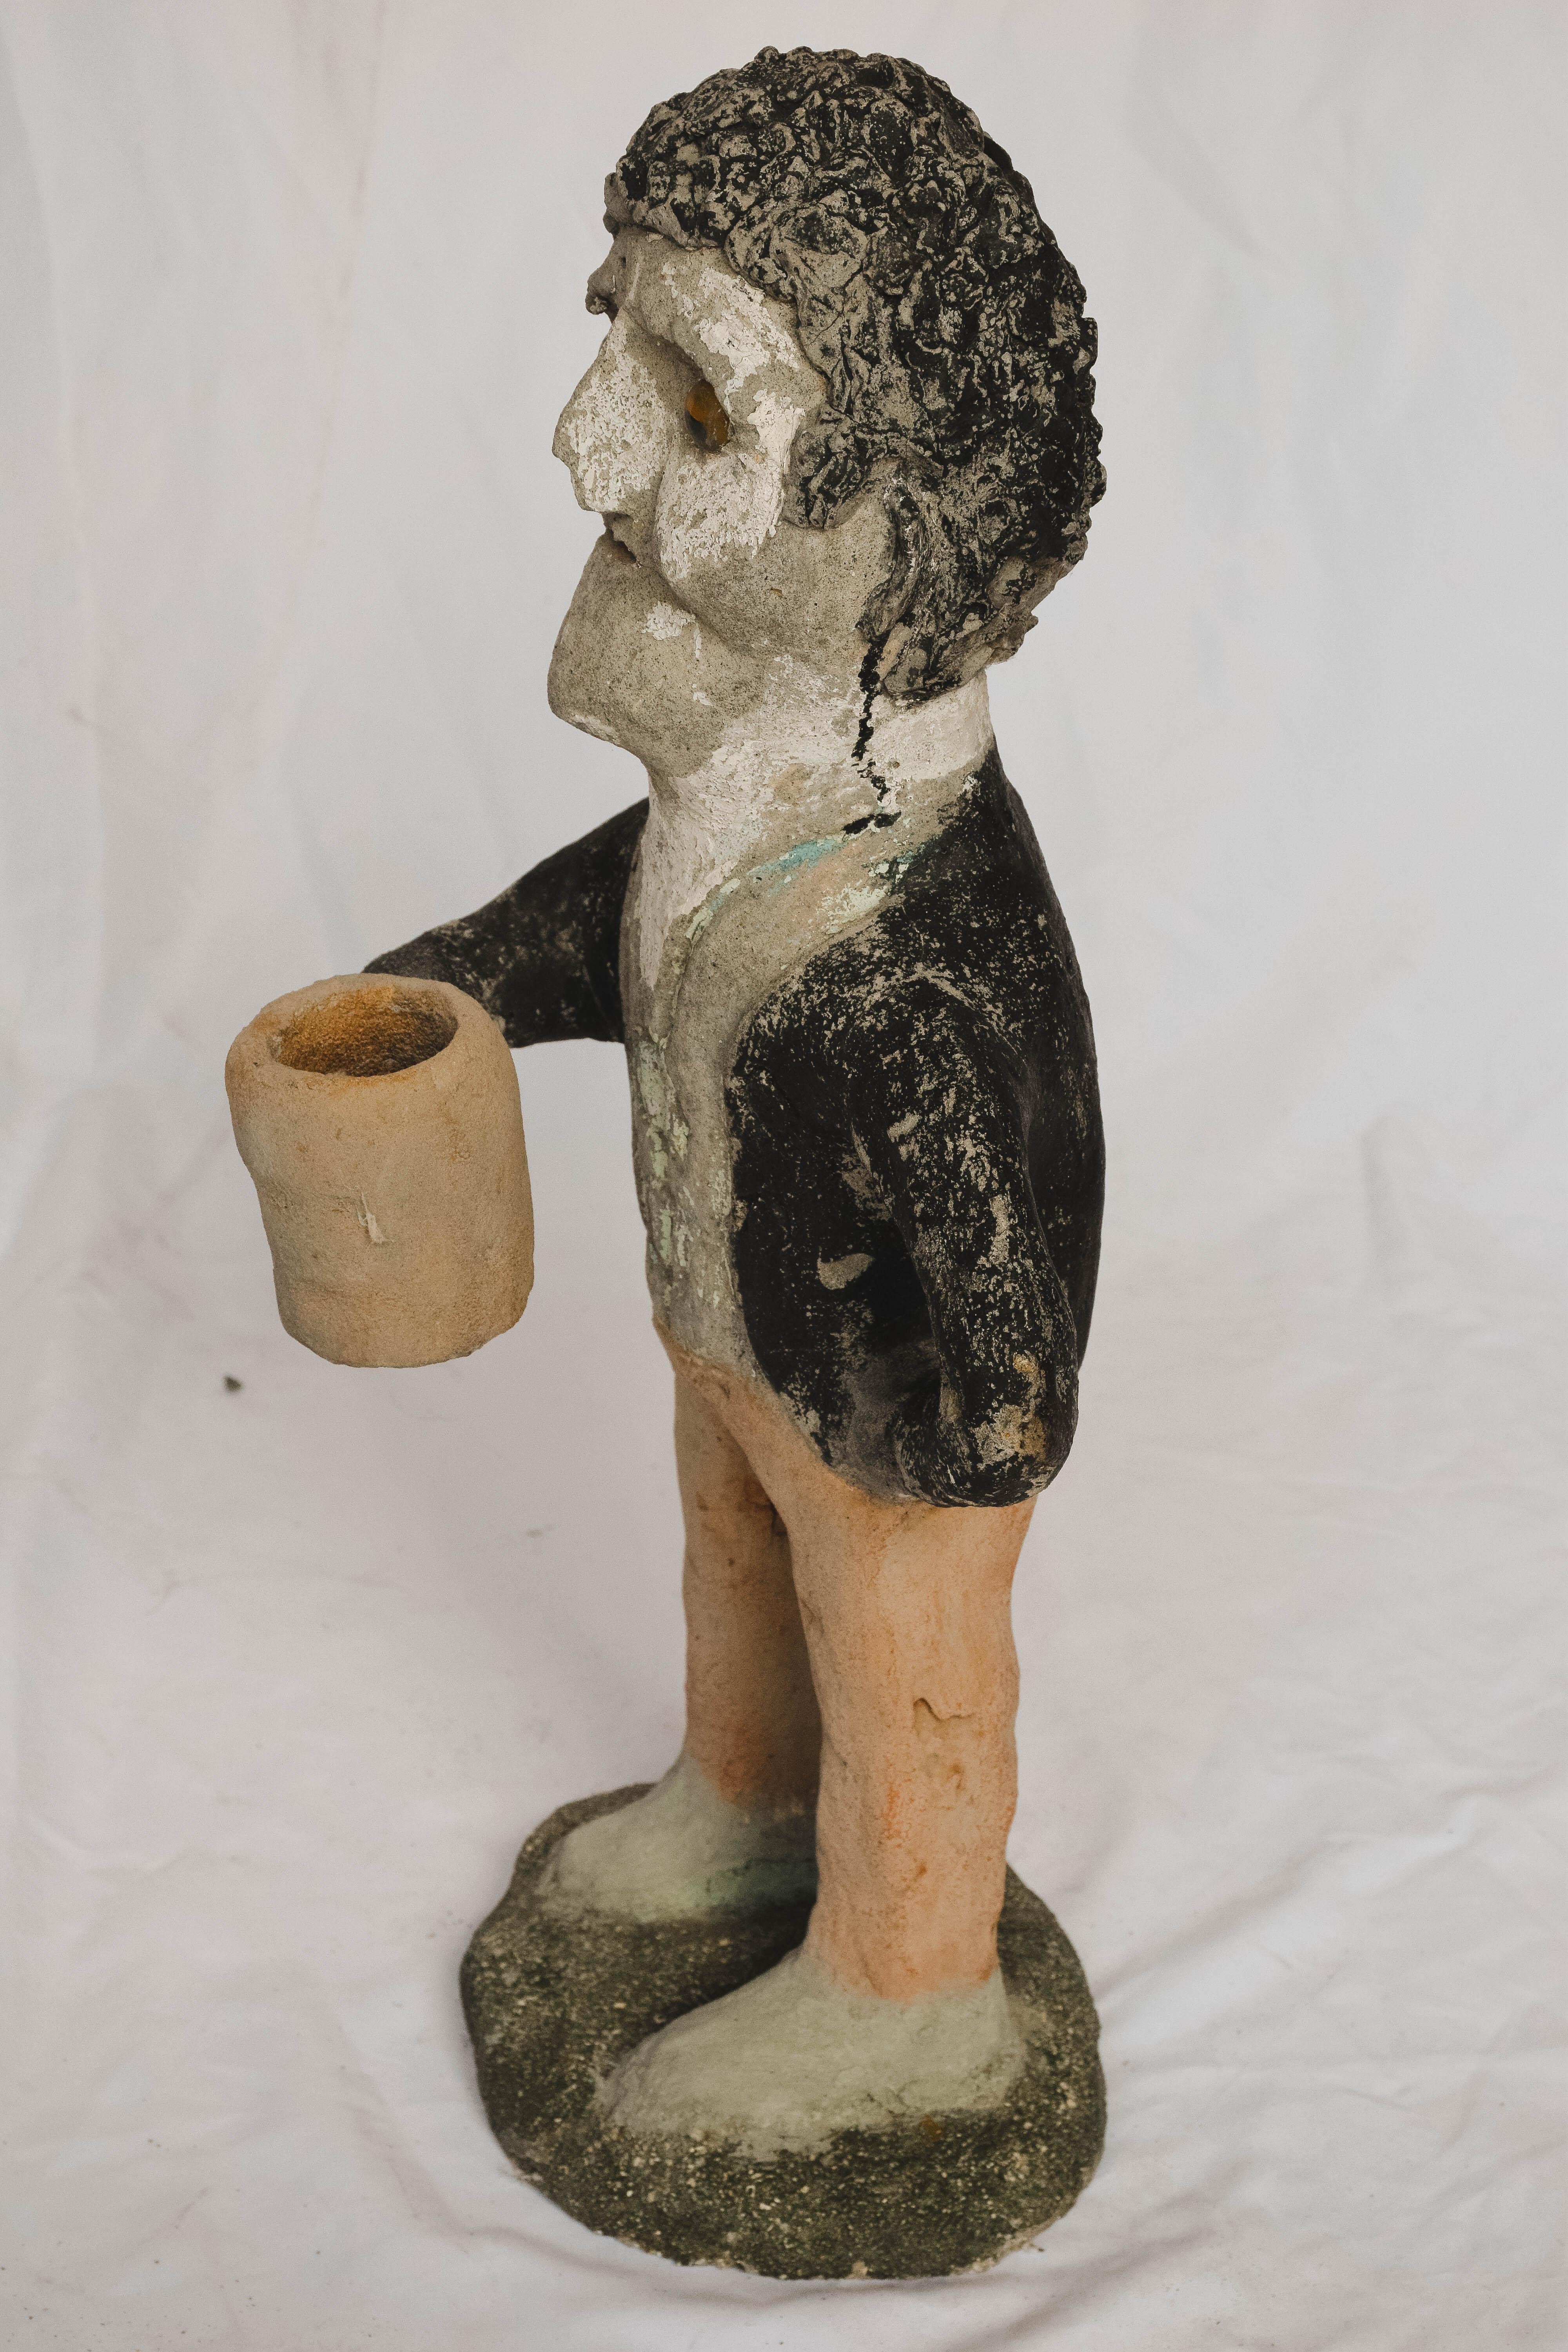 We love this concrete drinking man. The artist hand-sculpted the man adding paint and marble eyes to his art. A wonderful conversation piece for your garden, bar, man cave or kitchen. 

This piece weighs 20 lbs.